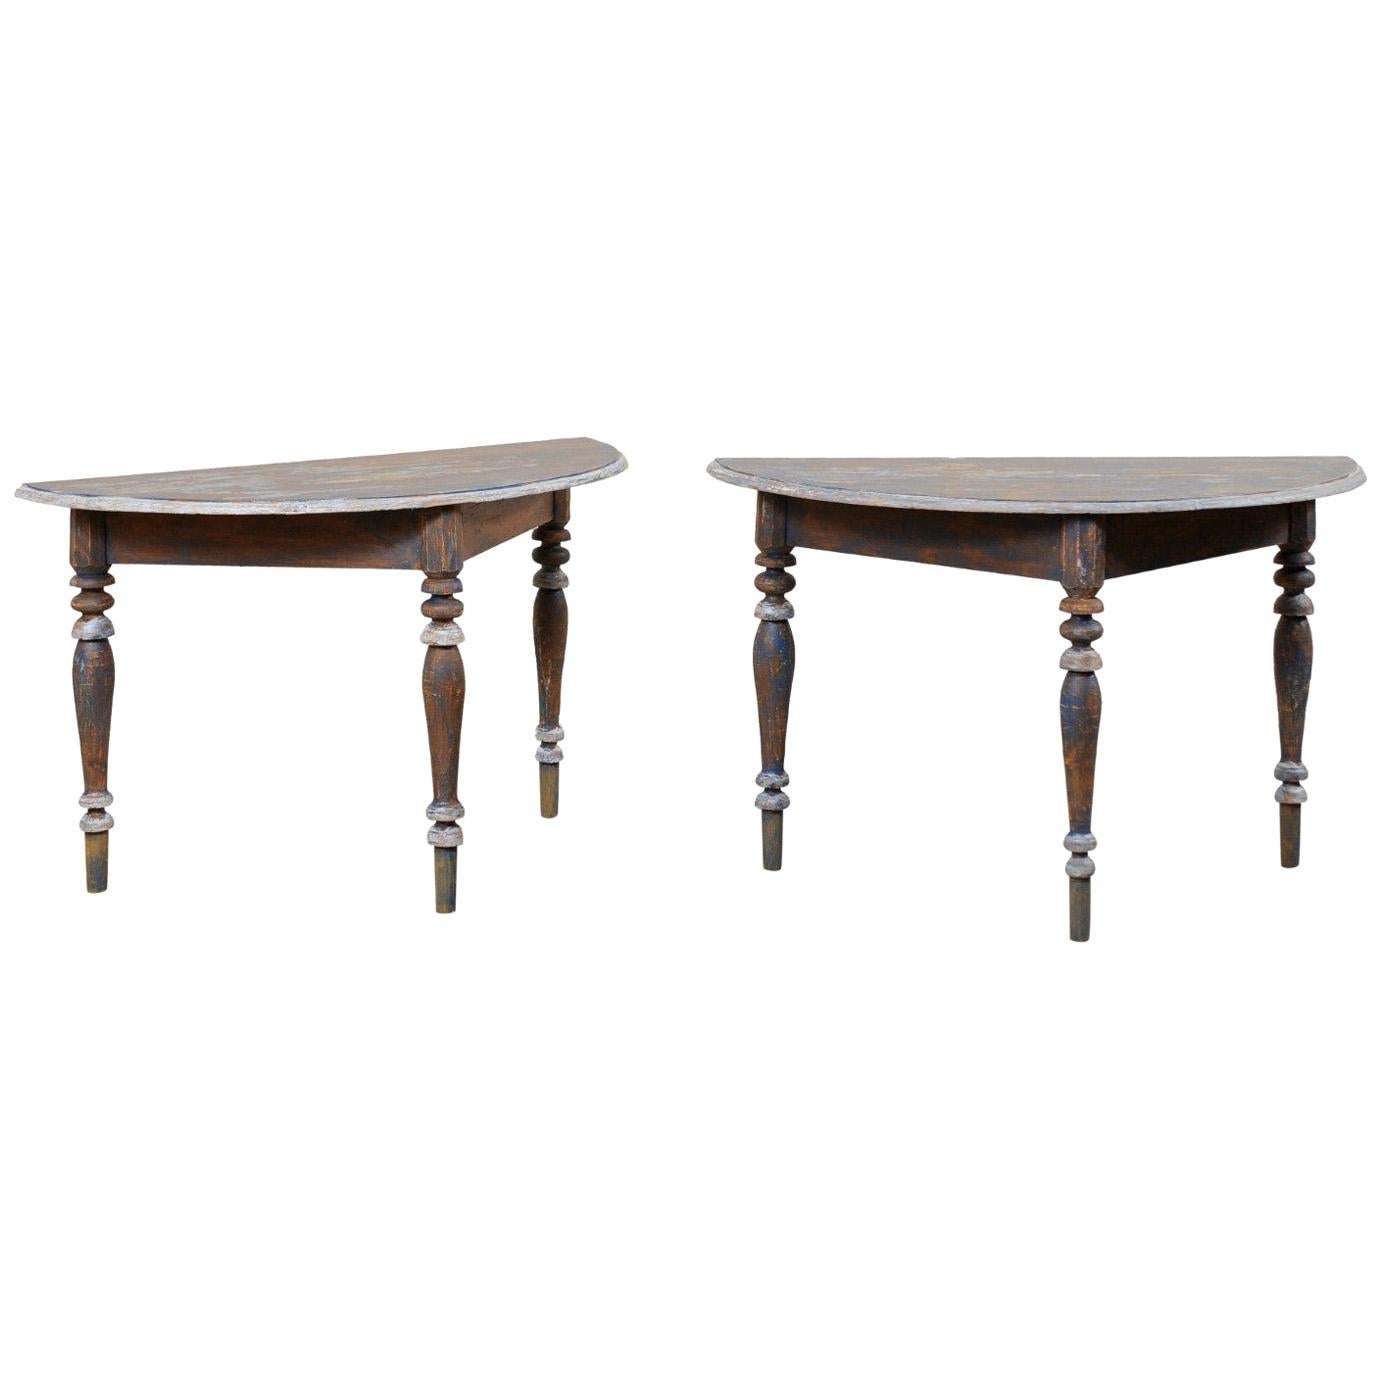 Pair of 19th Century Swedish Demilune Tables with Beautiful Blue Coloring